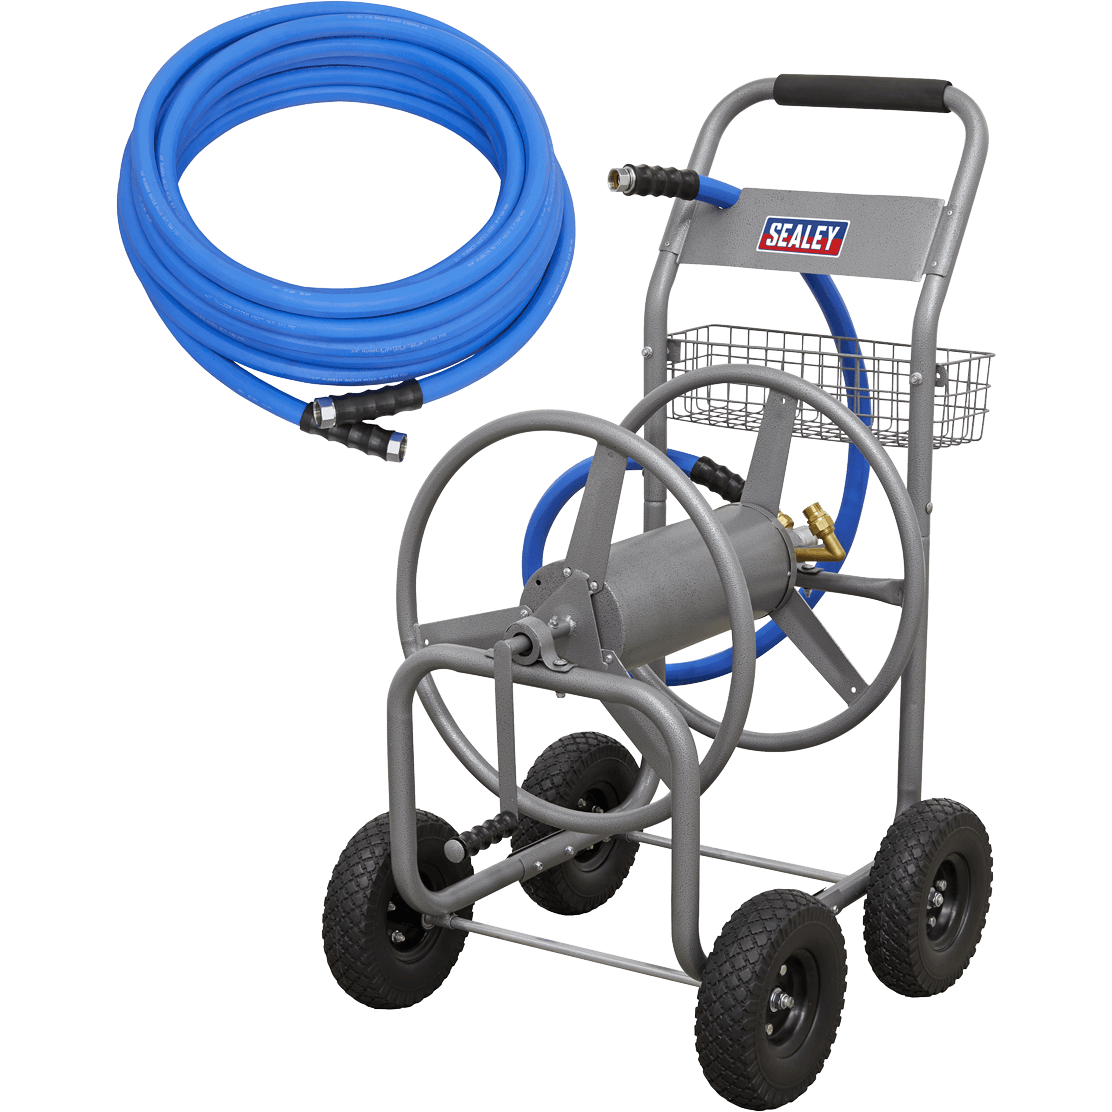 Sealey Hot and Cold Water Rubber Heavy Duty Hose Reel Cart 3/4" / 19mm 30m Blue